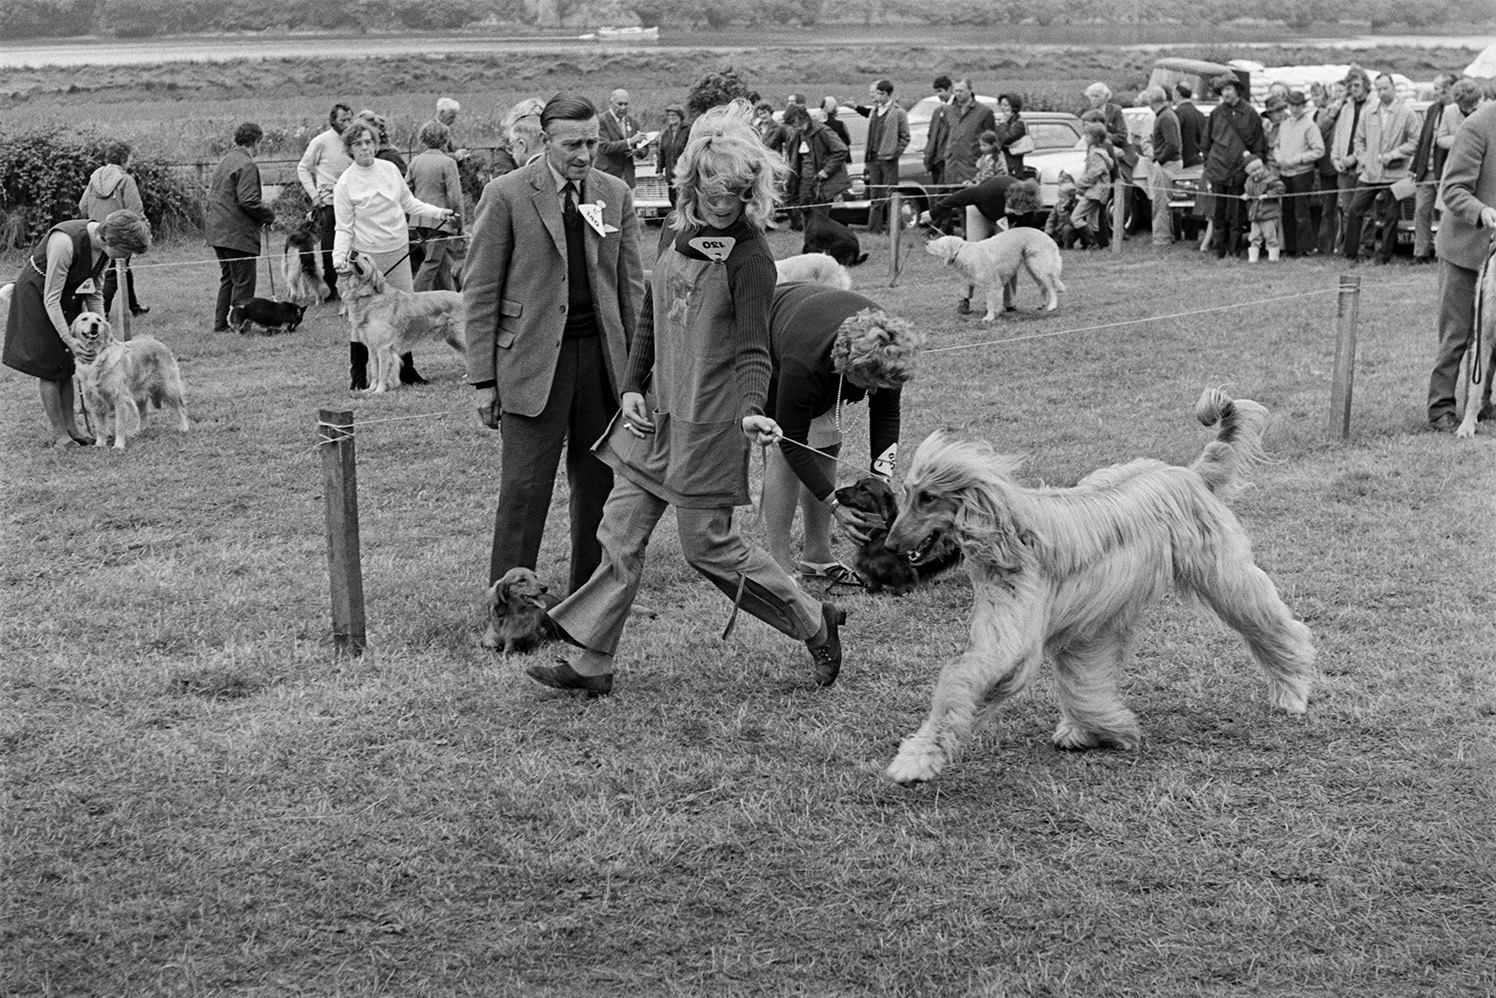 A woman and her dog competing in a dog show at the North Devon Show at Instow. A man is judging the competition. Other dogs waiting to compete can be seen in the background.